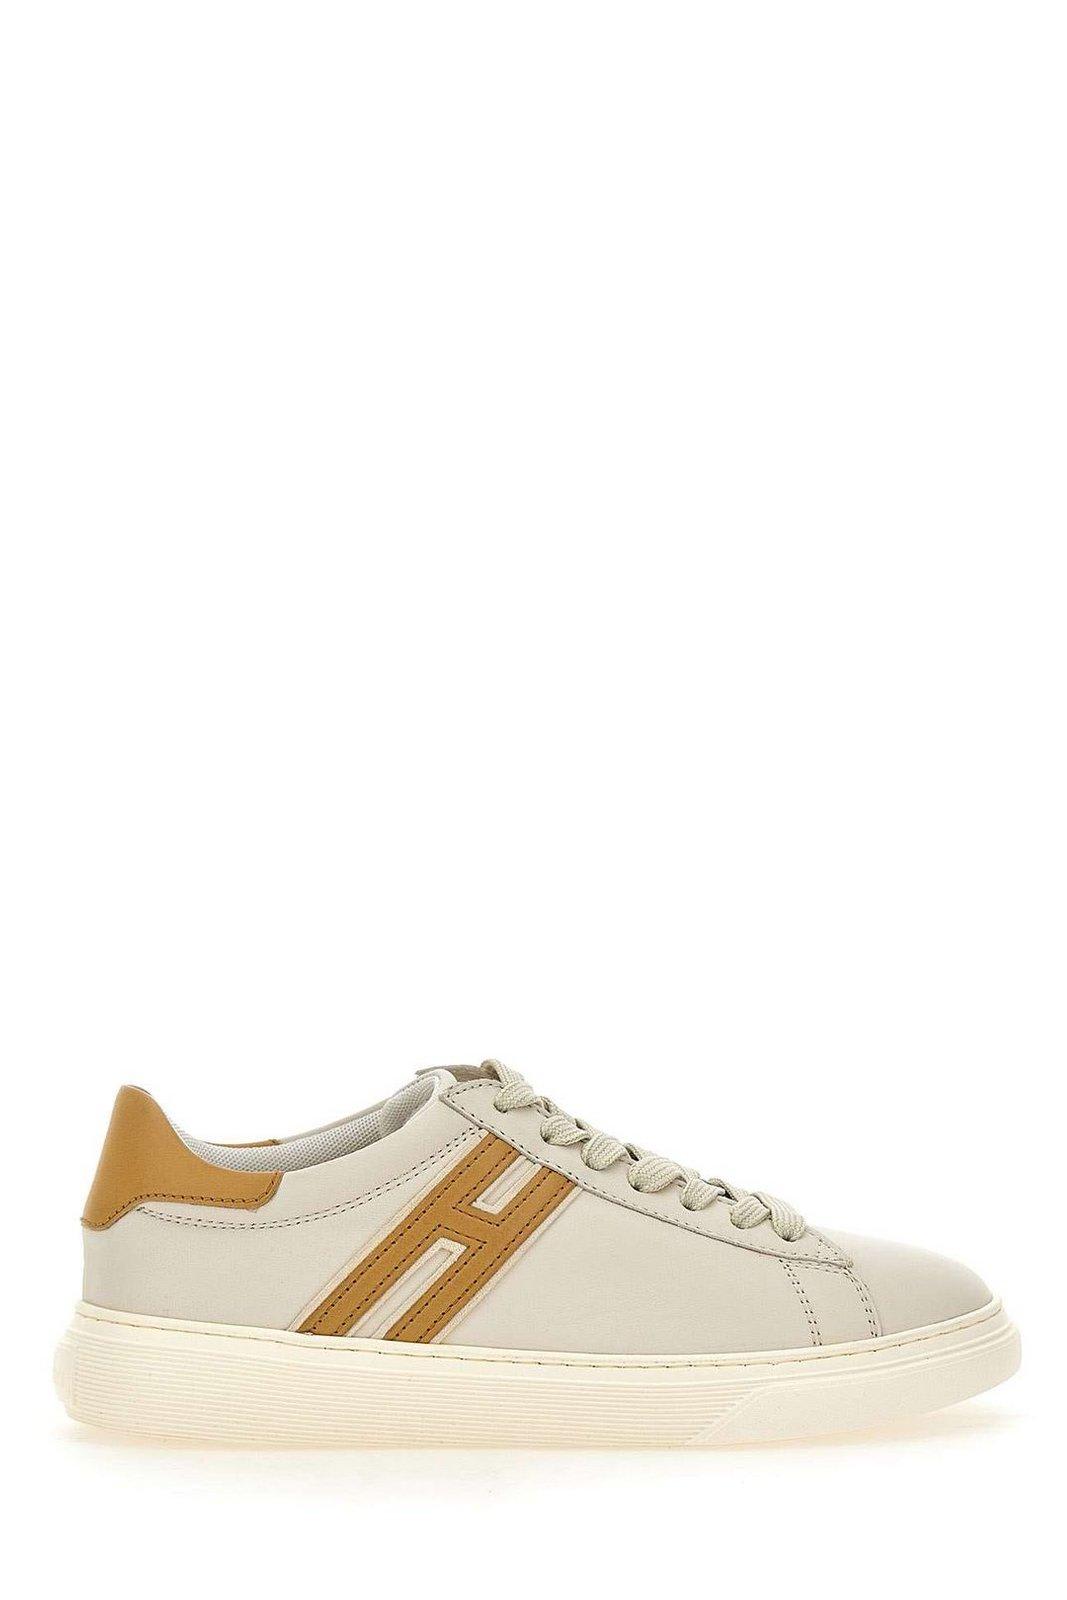 HOGAN H365 LACE-UP SNEAKERS